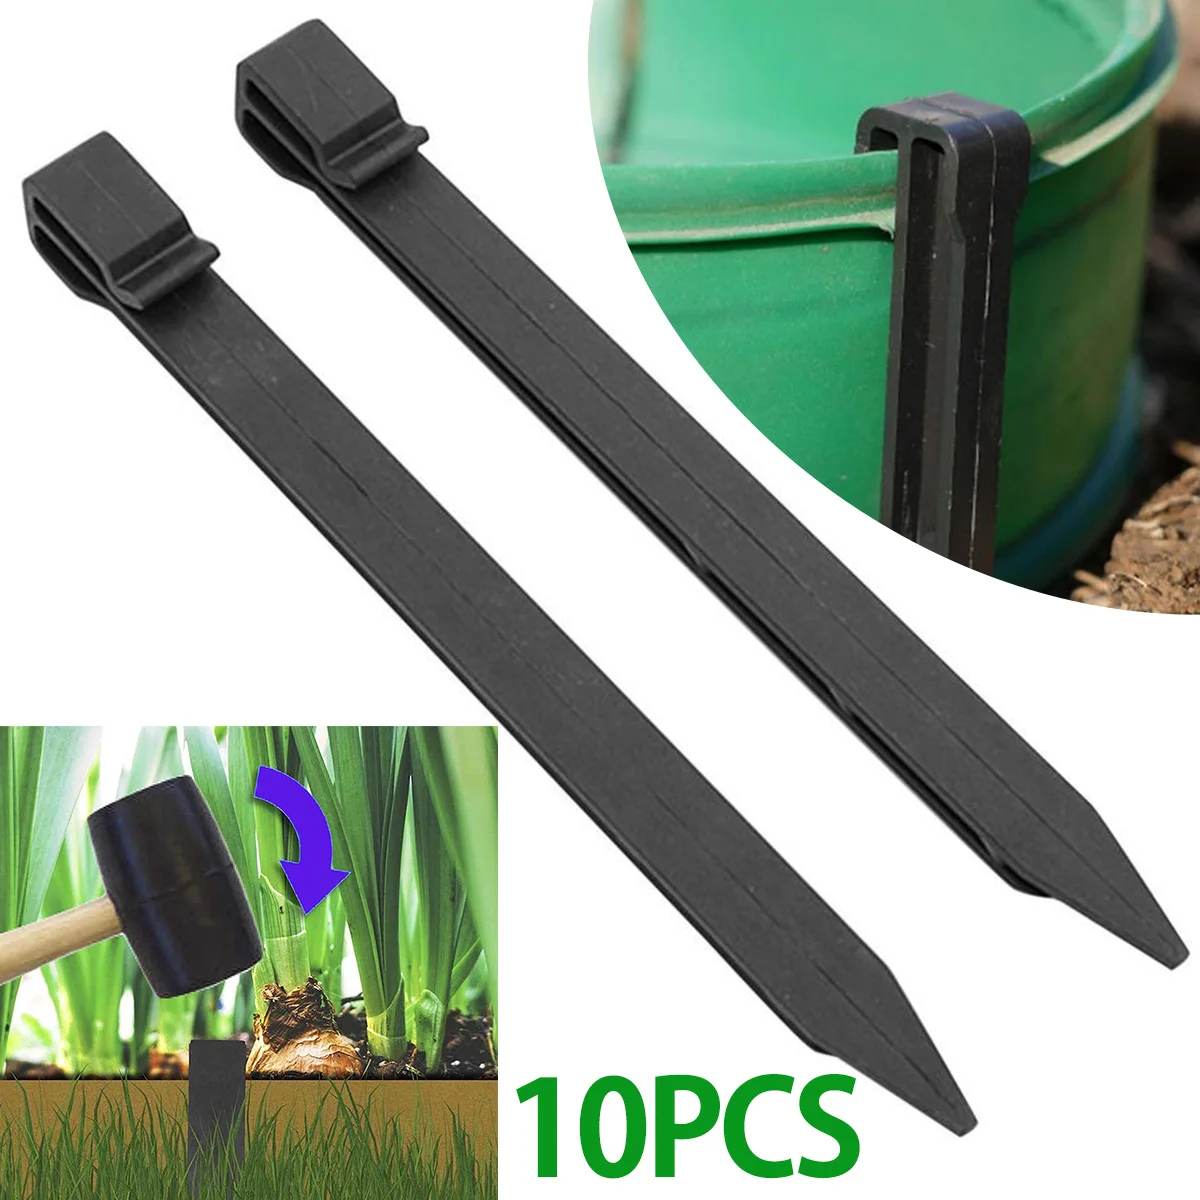 10Pcs Garden Landscape Edging Stake 10" Plastic Lawn Edging Stake Landscape Edging Spike Garden Netting Ground Stakes Durable